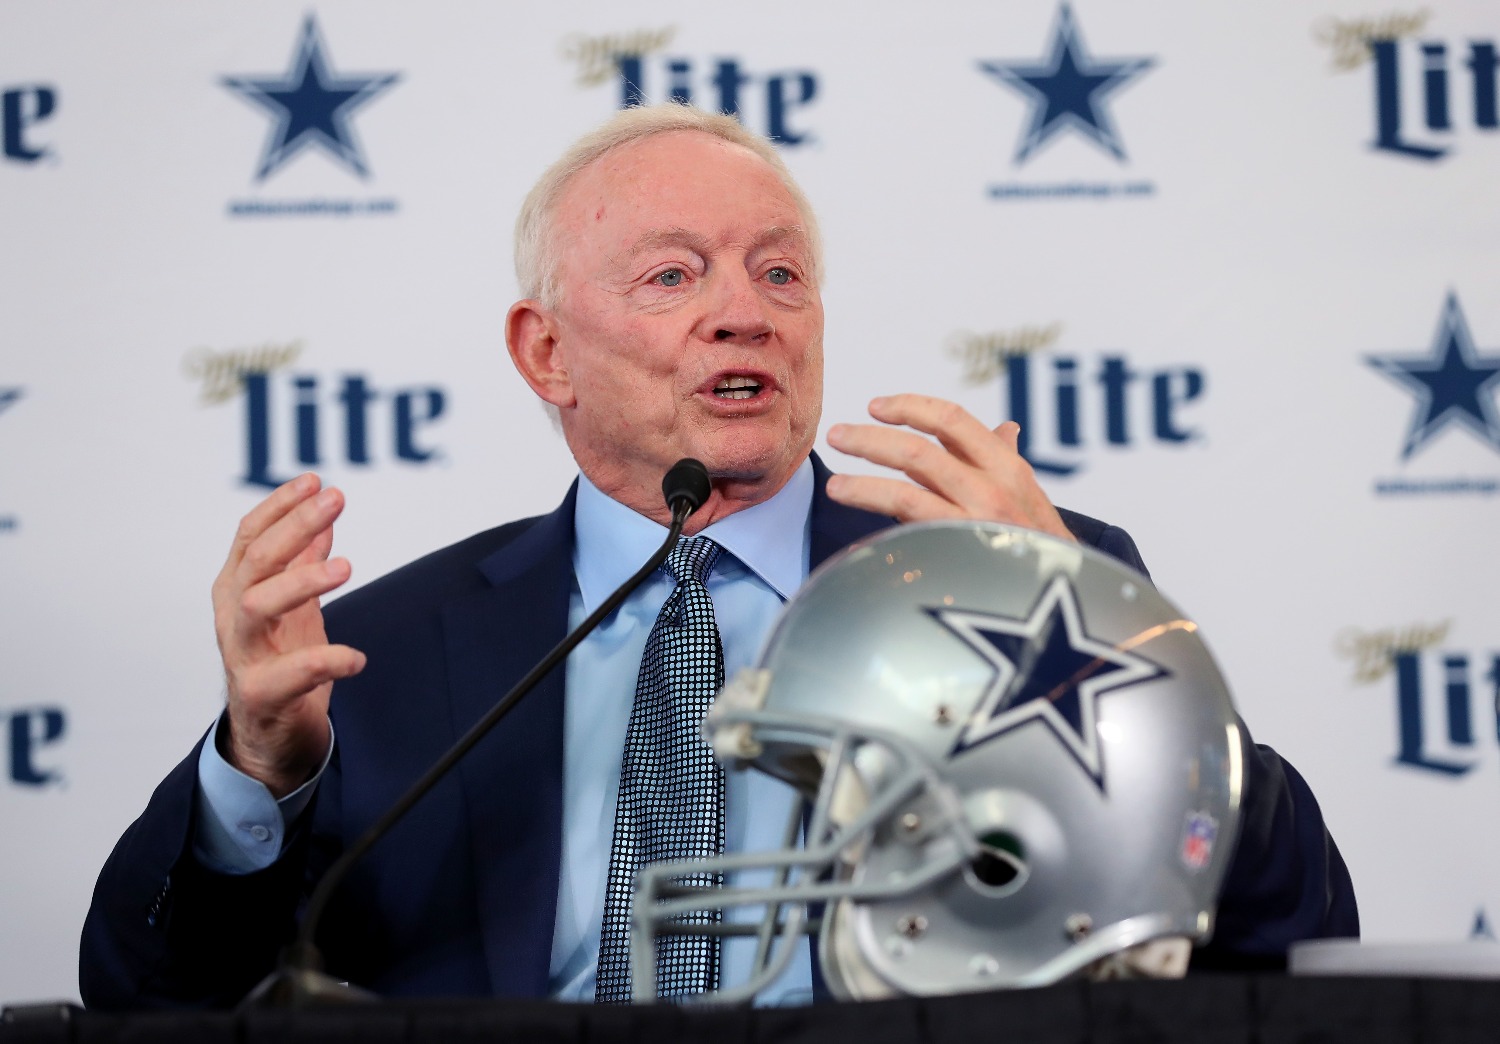 Jerry Jones set the record straight on the Cowboys pursuing Earl Thomas.